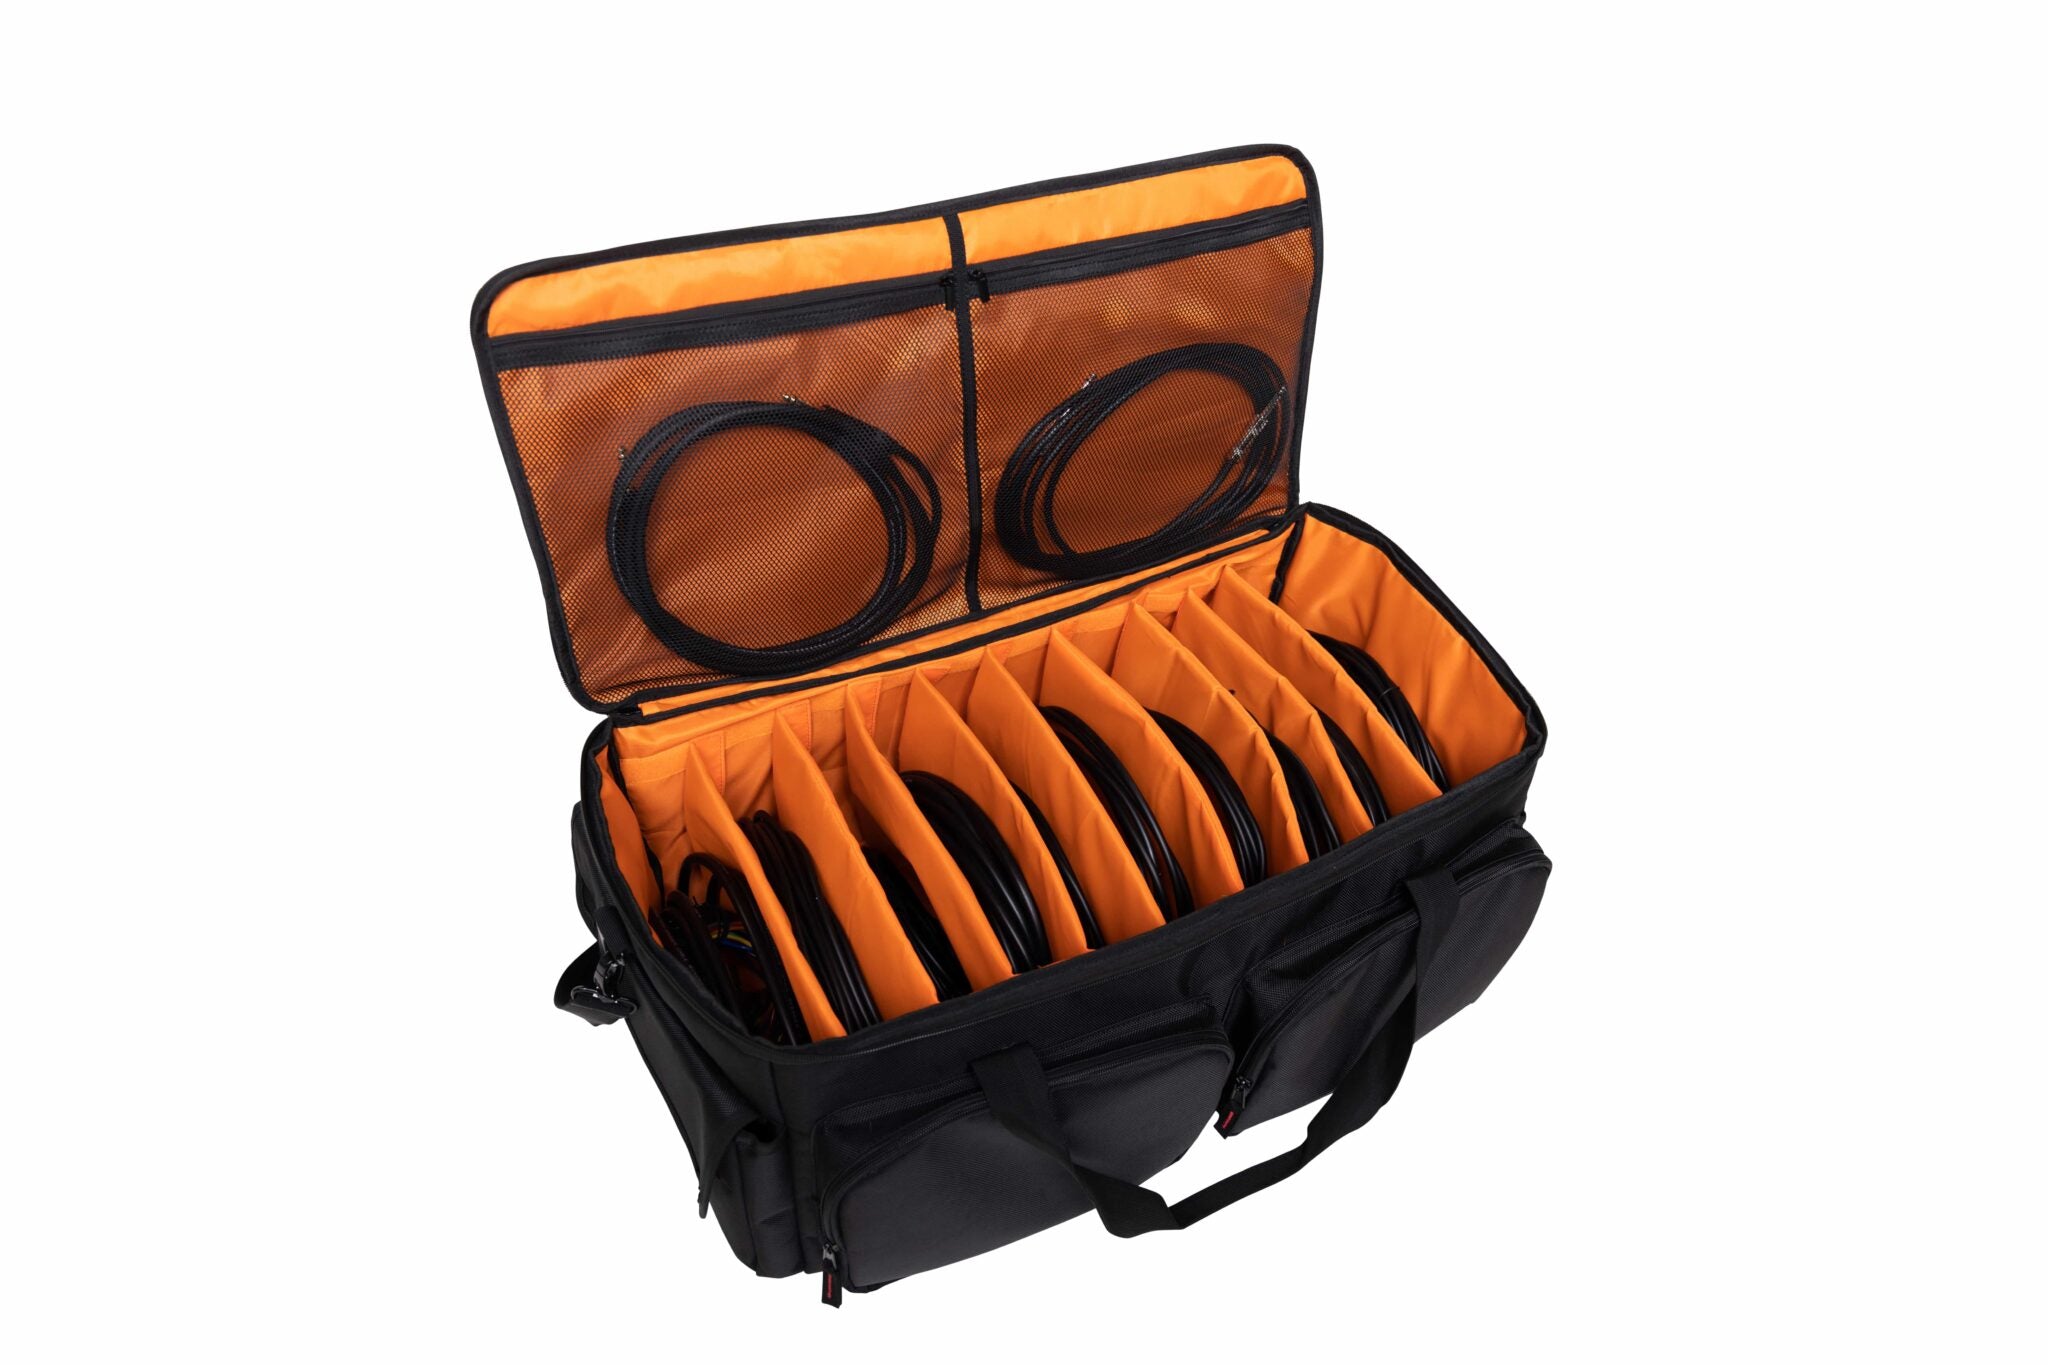 Gator Cases LG Cable & Accessory Organization Bag